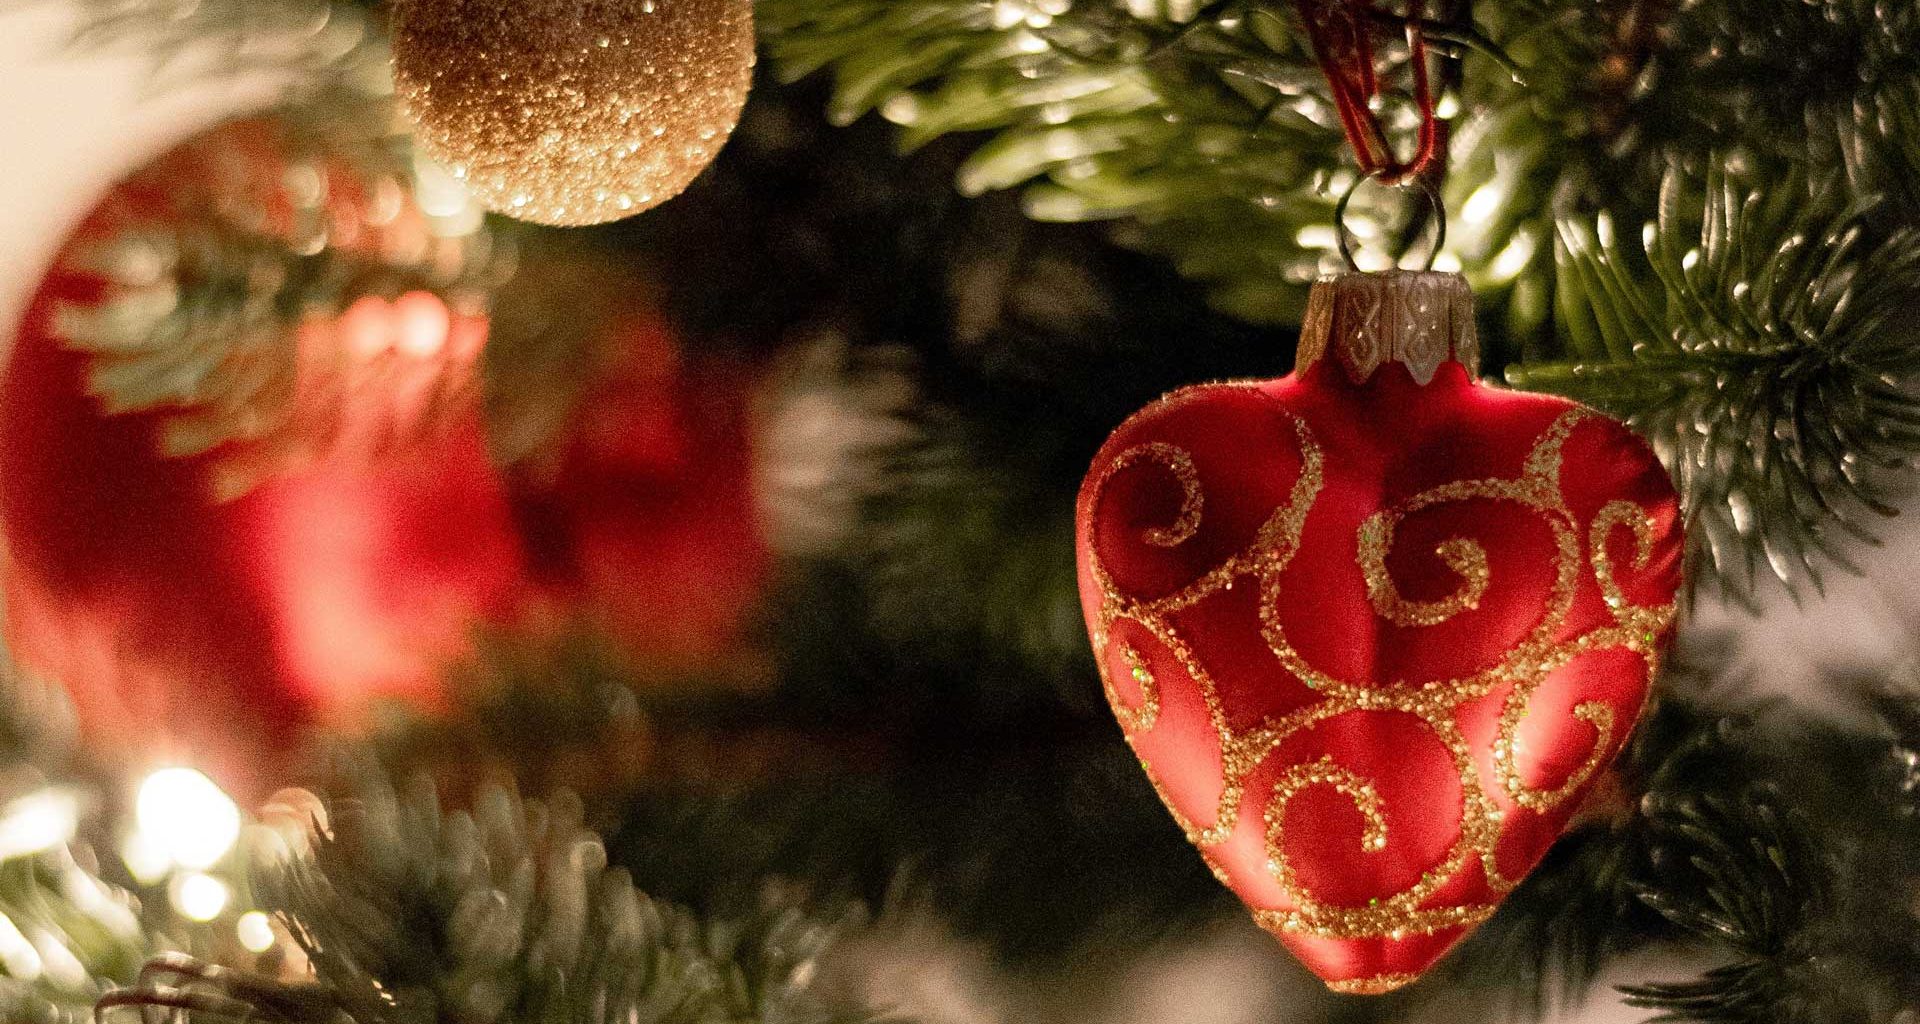 Close up image of Christmas tree with red, heart-shaped ornament in foreground